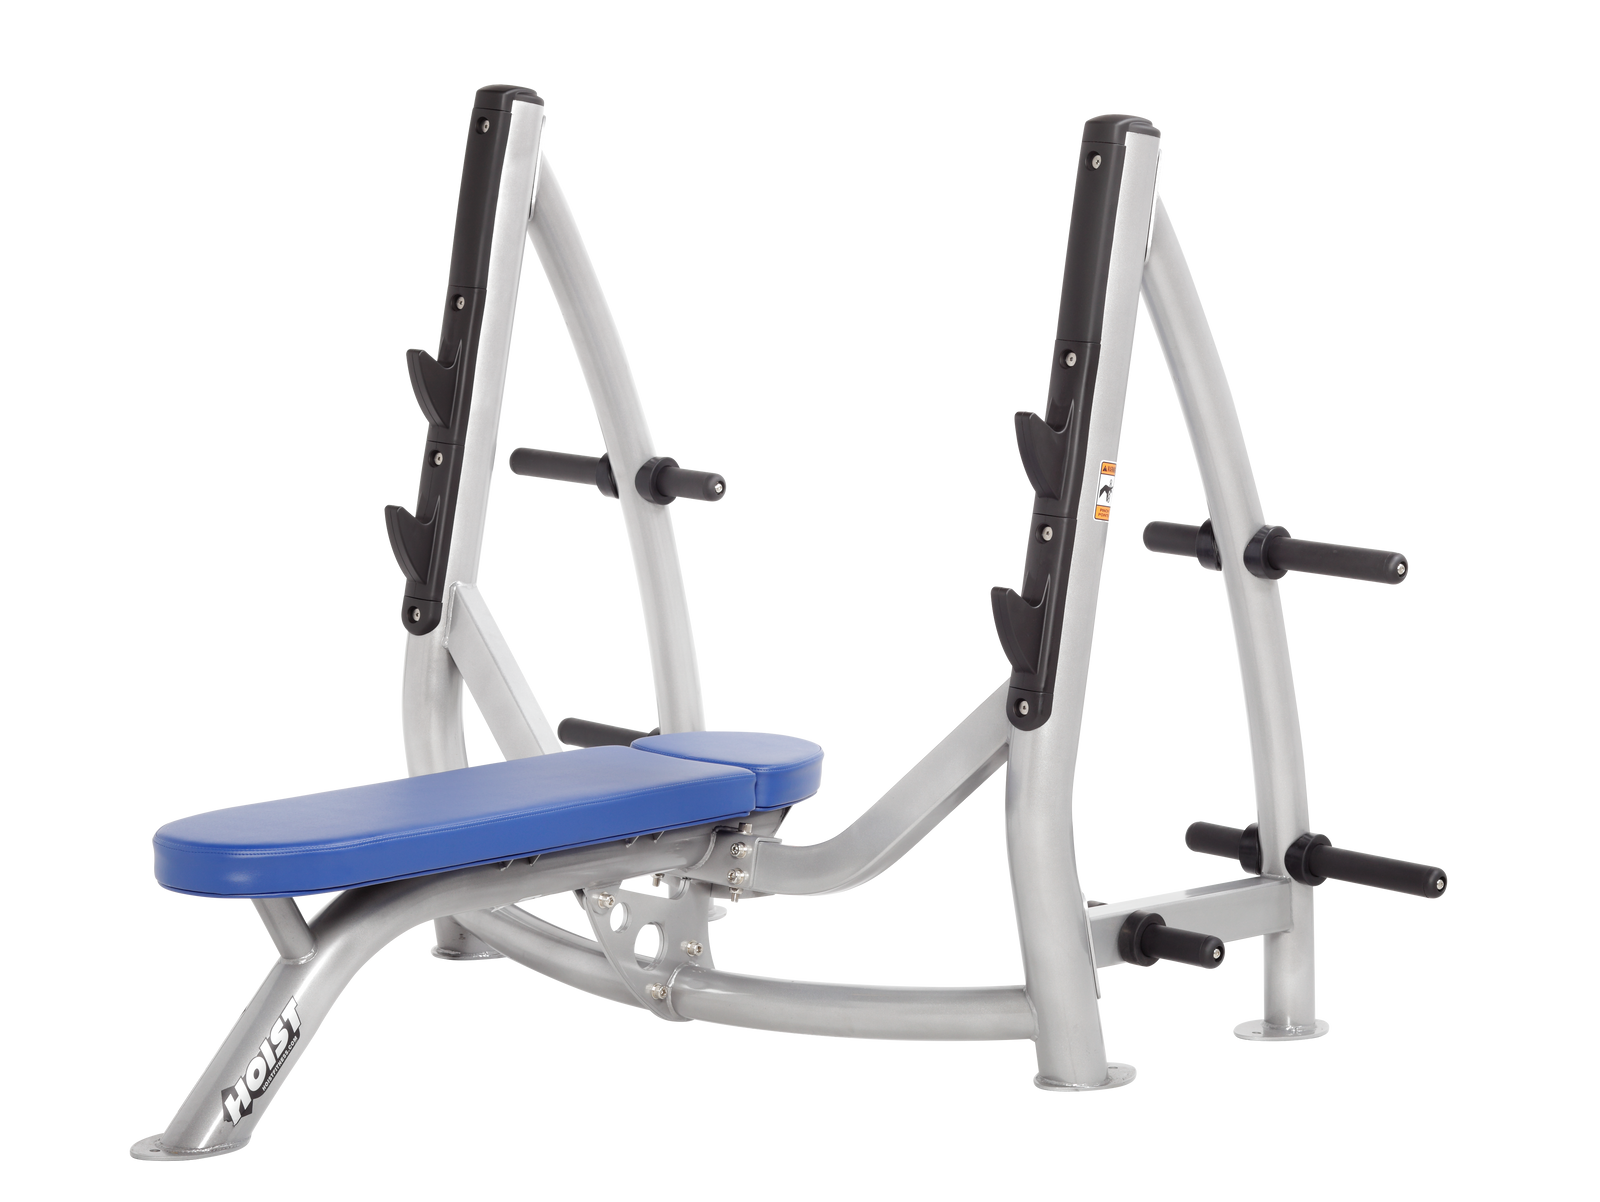 Fitway Flat Bench - Fitness Experience